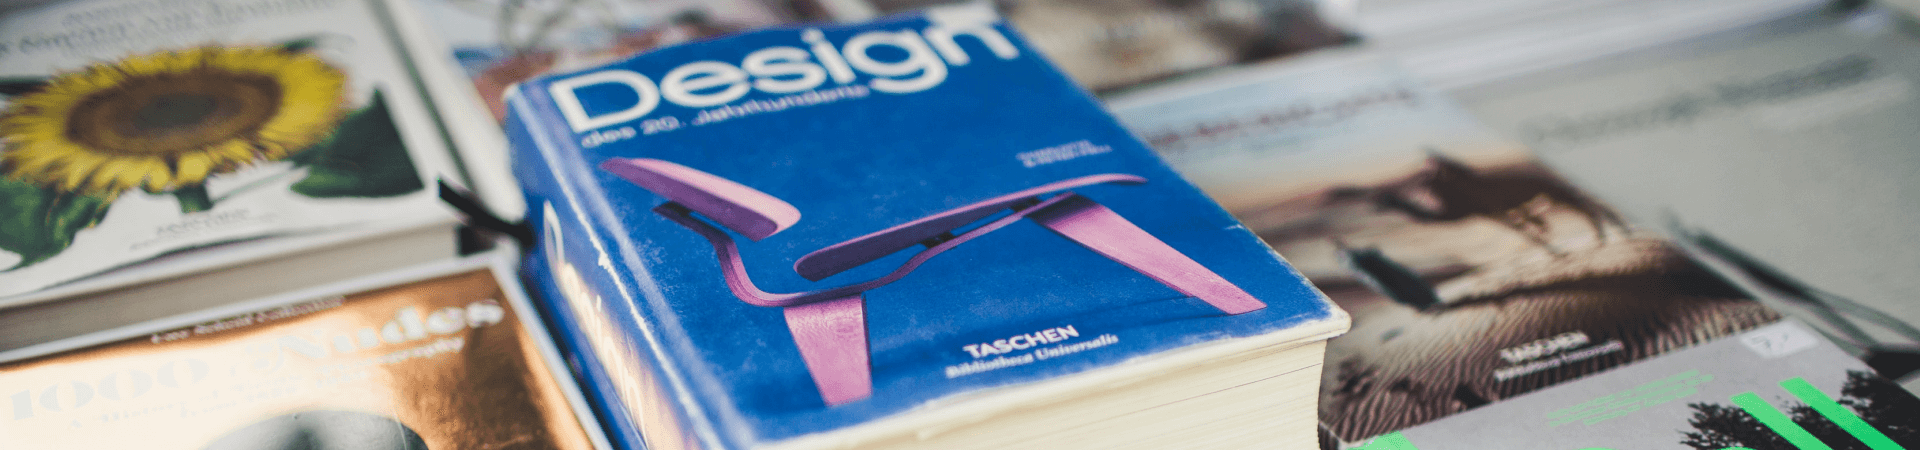 A book titled 'Design' by TASCHEN, with blurred books in the background